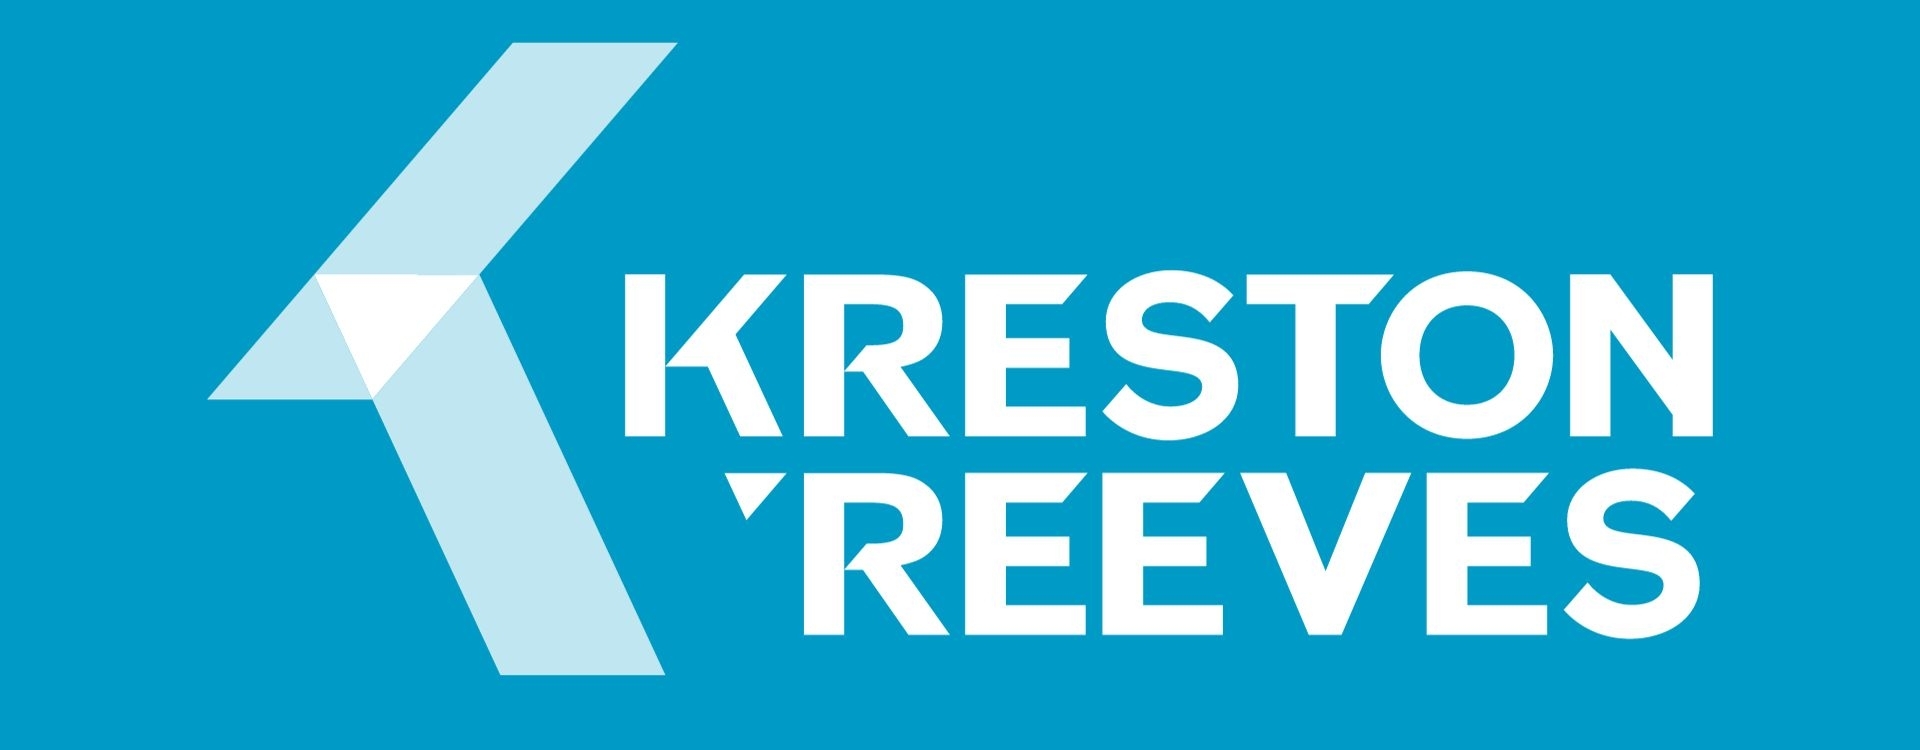 Kreston Reeves publishes B Corp™ and ESG impact reports